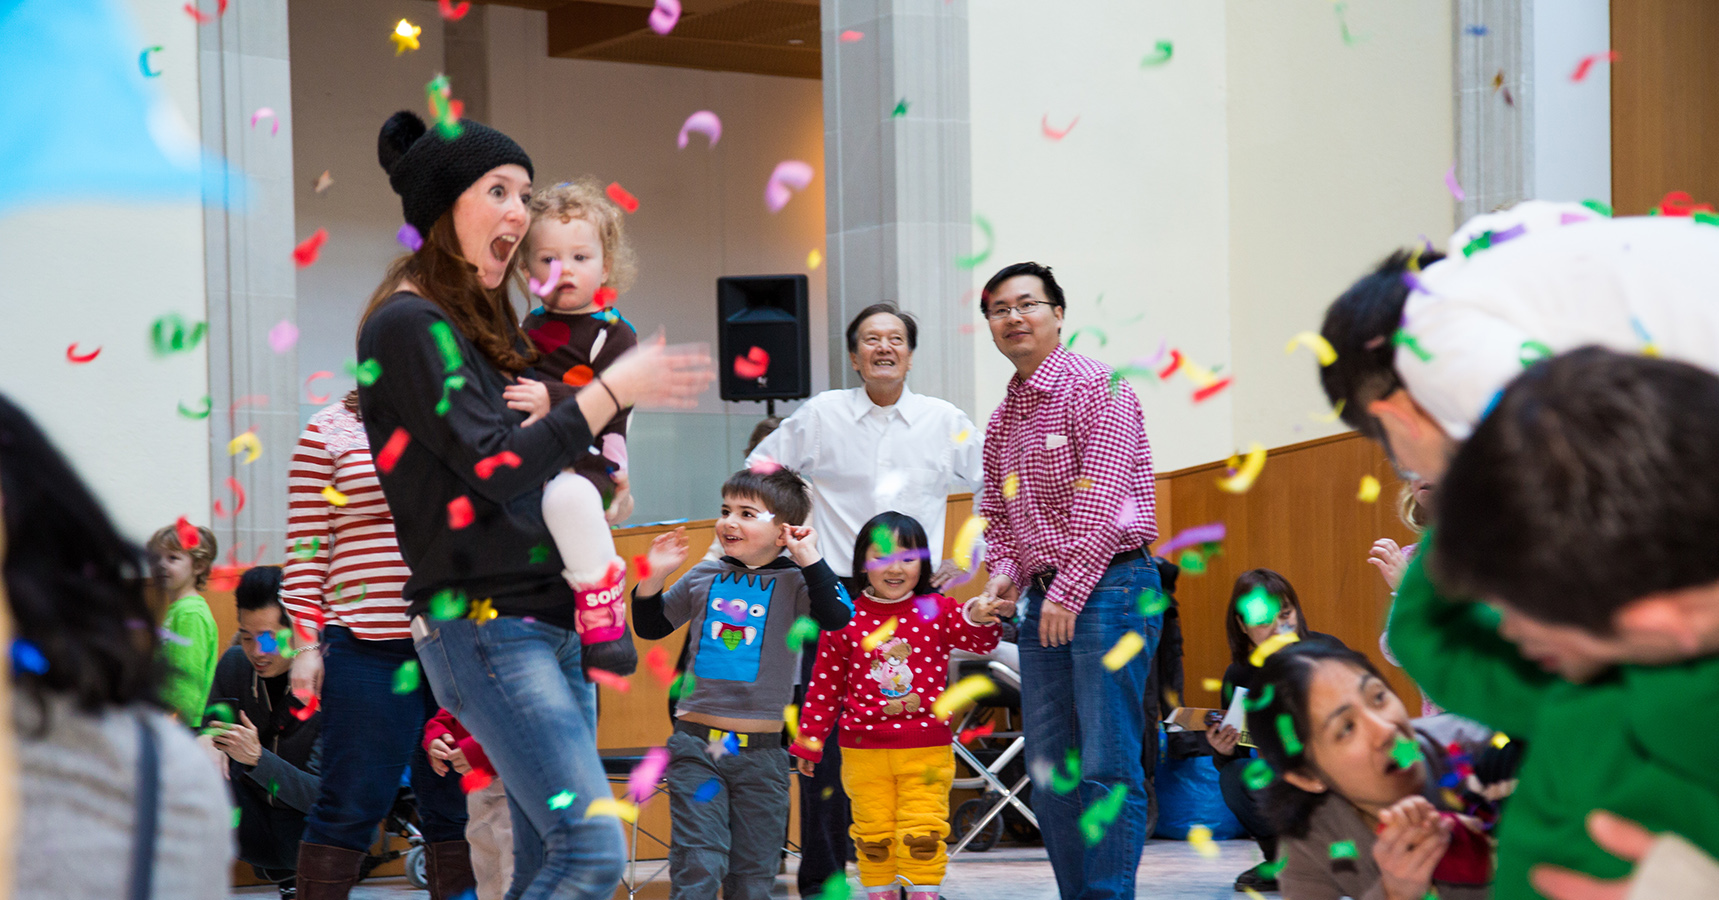 A group of adults and children play in a room full of falling confetti